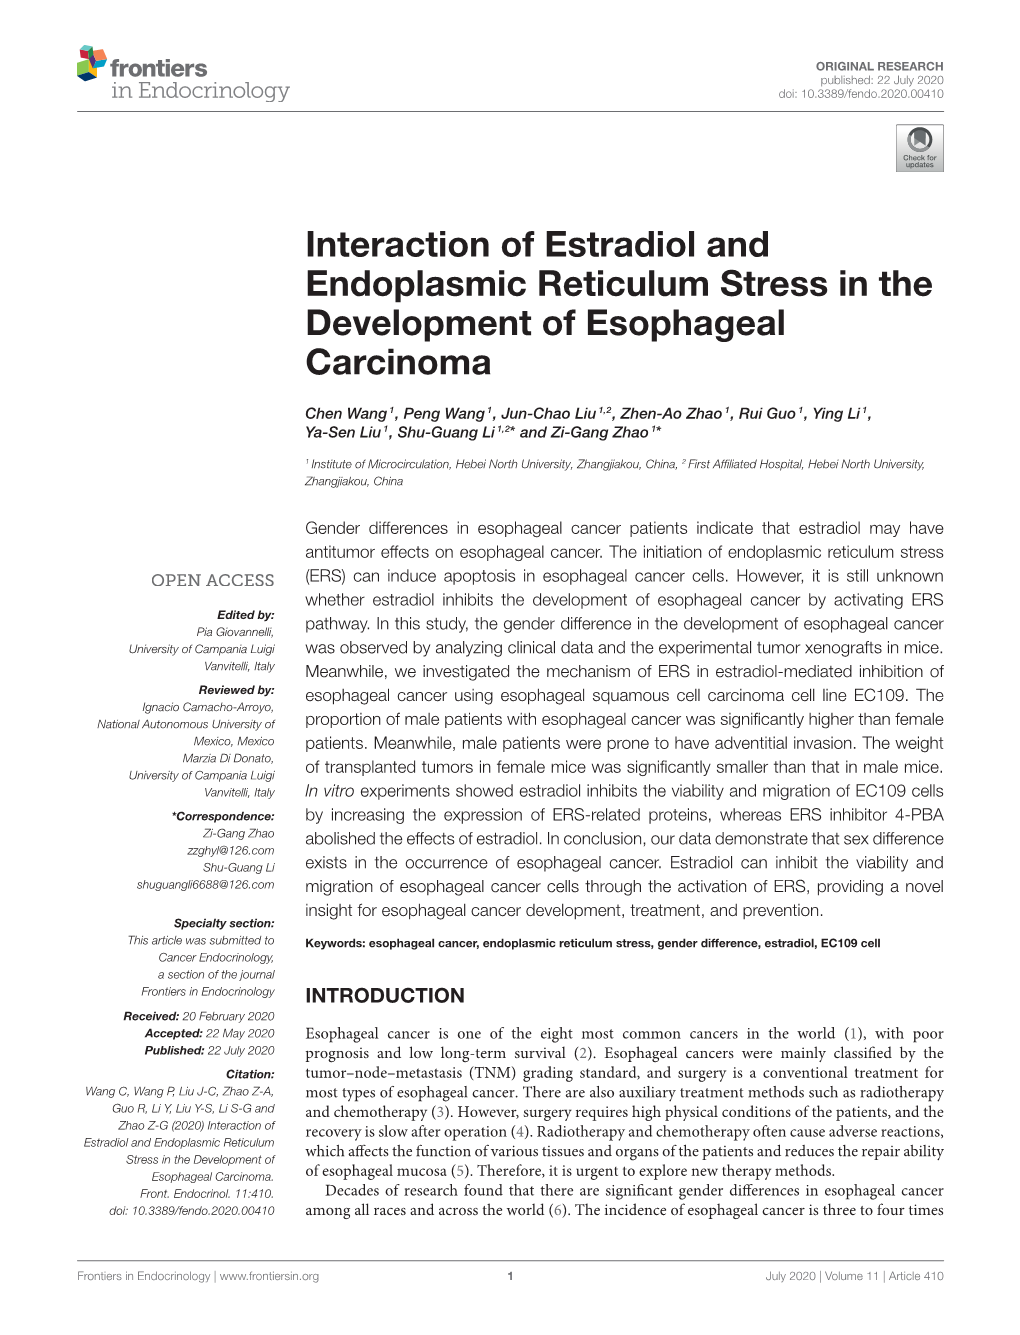 Interaction of Estradiol and Endoplasmic Reticulum Stress in the Development of Esophageal Carcinoma